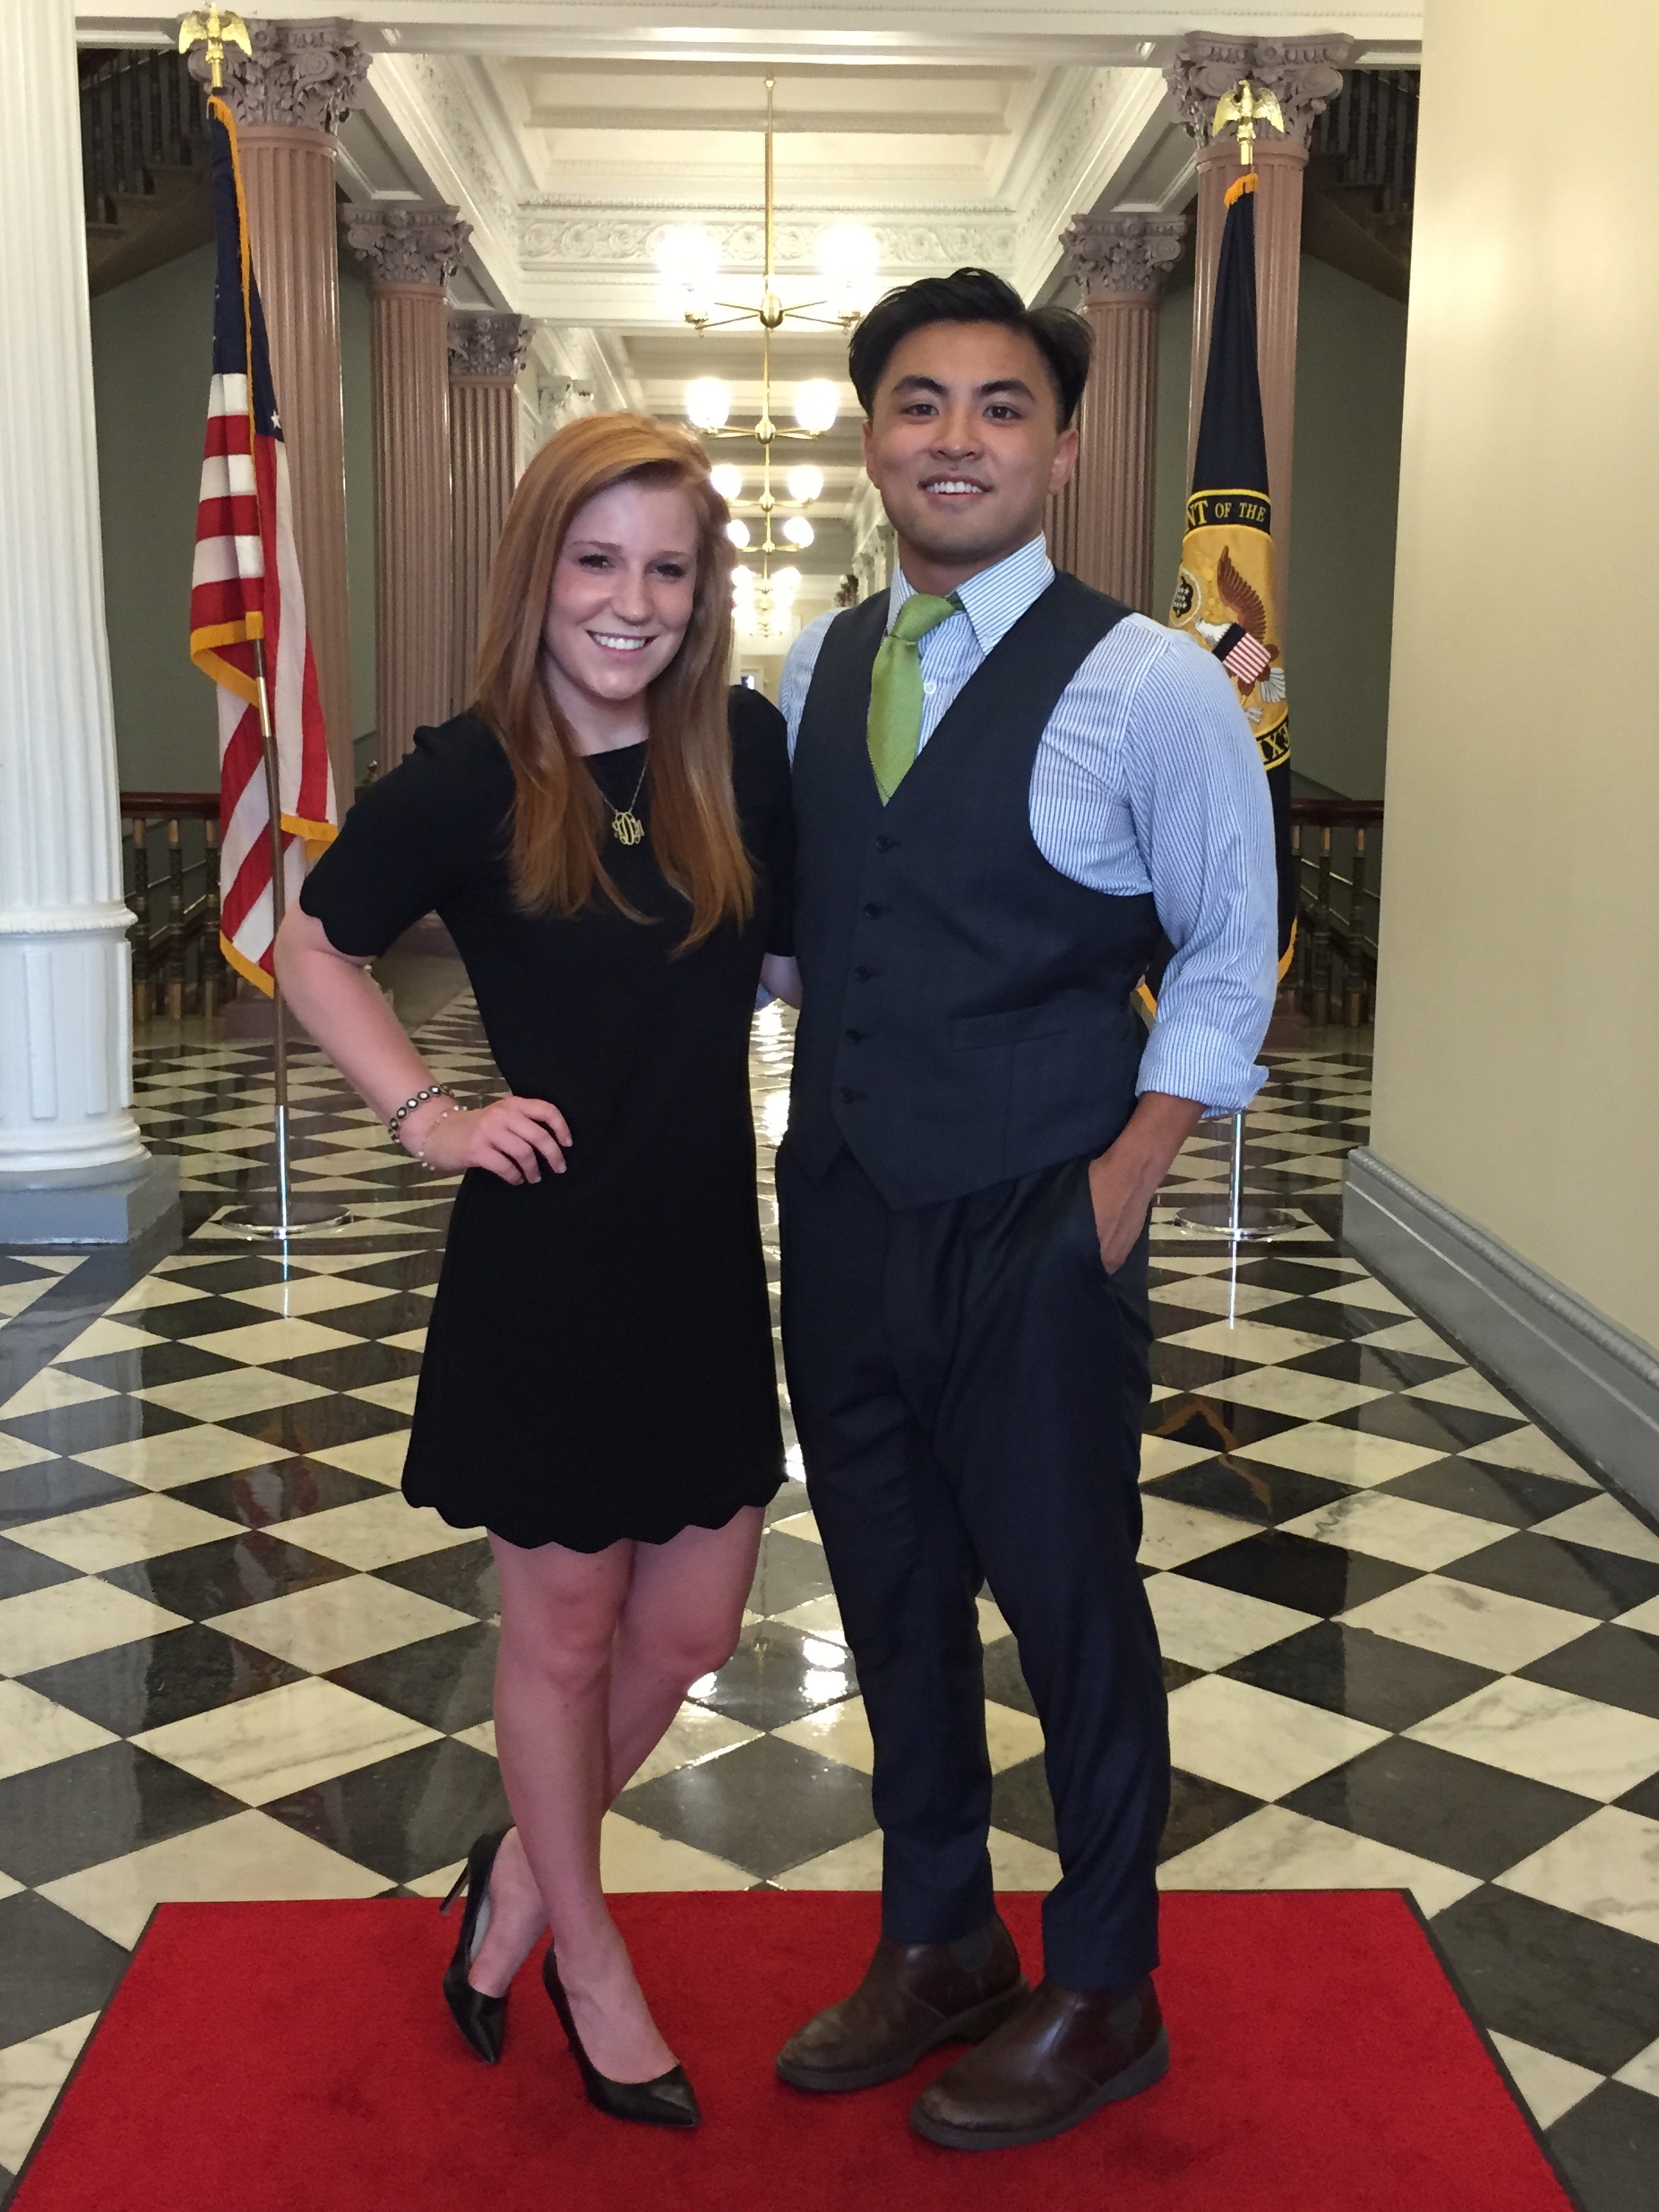 Seniors Alena Deveau and Max Luong in the White House for their summer internship